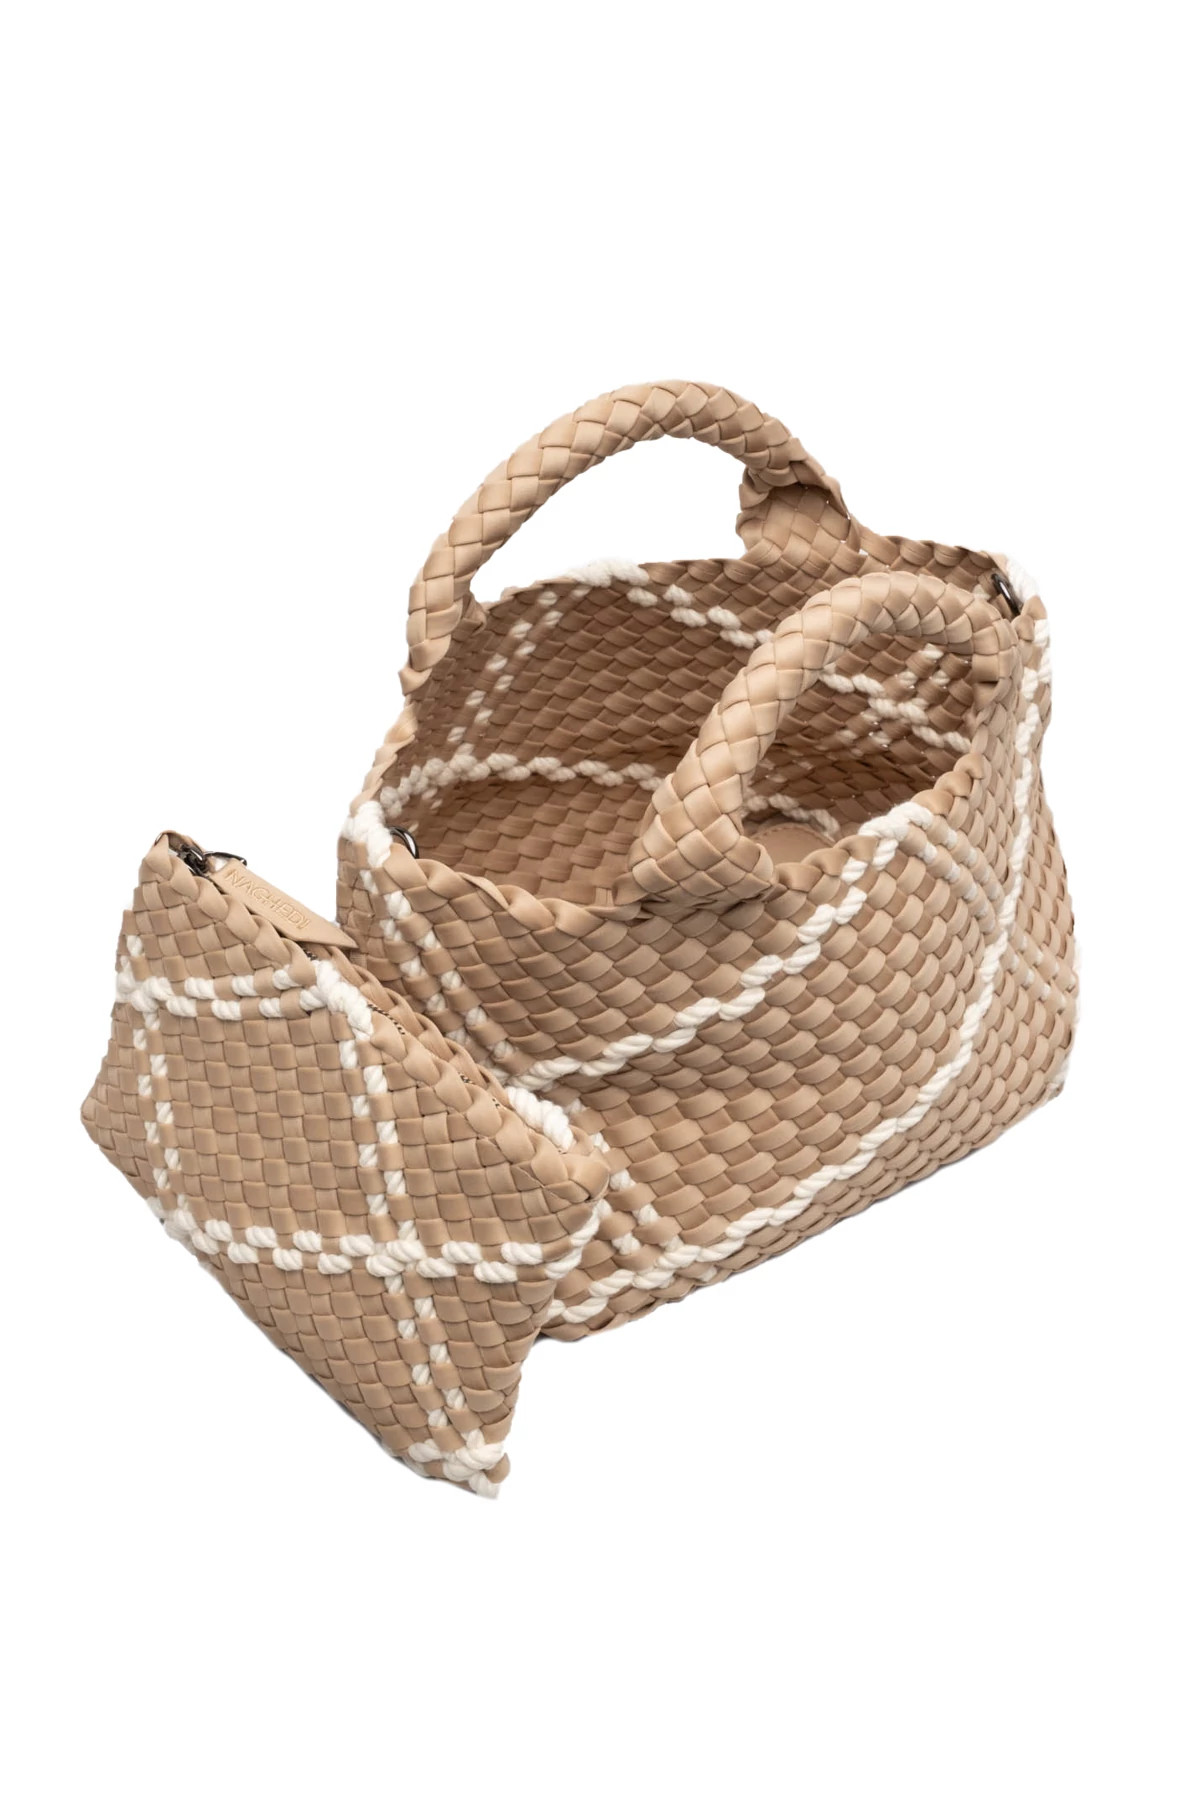 CAMEL Woven Rope Mini Tote image number 2